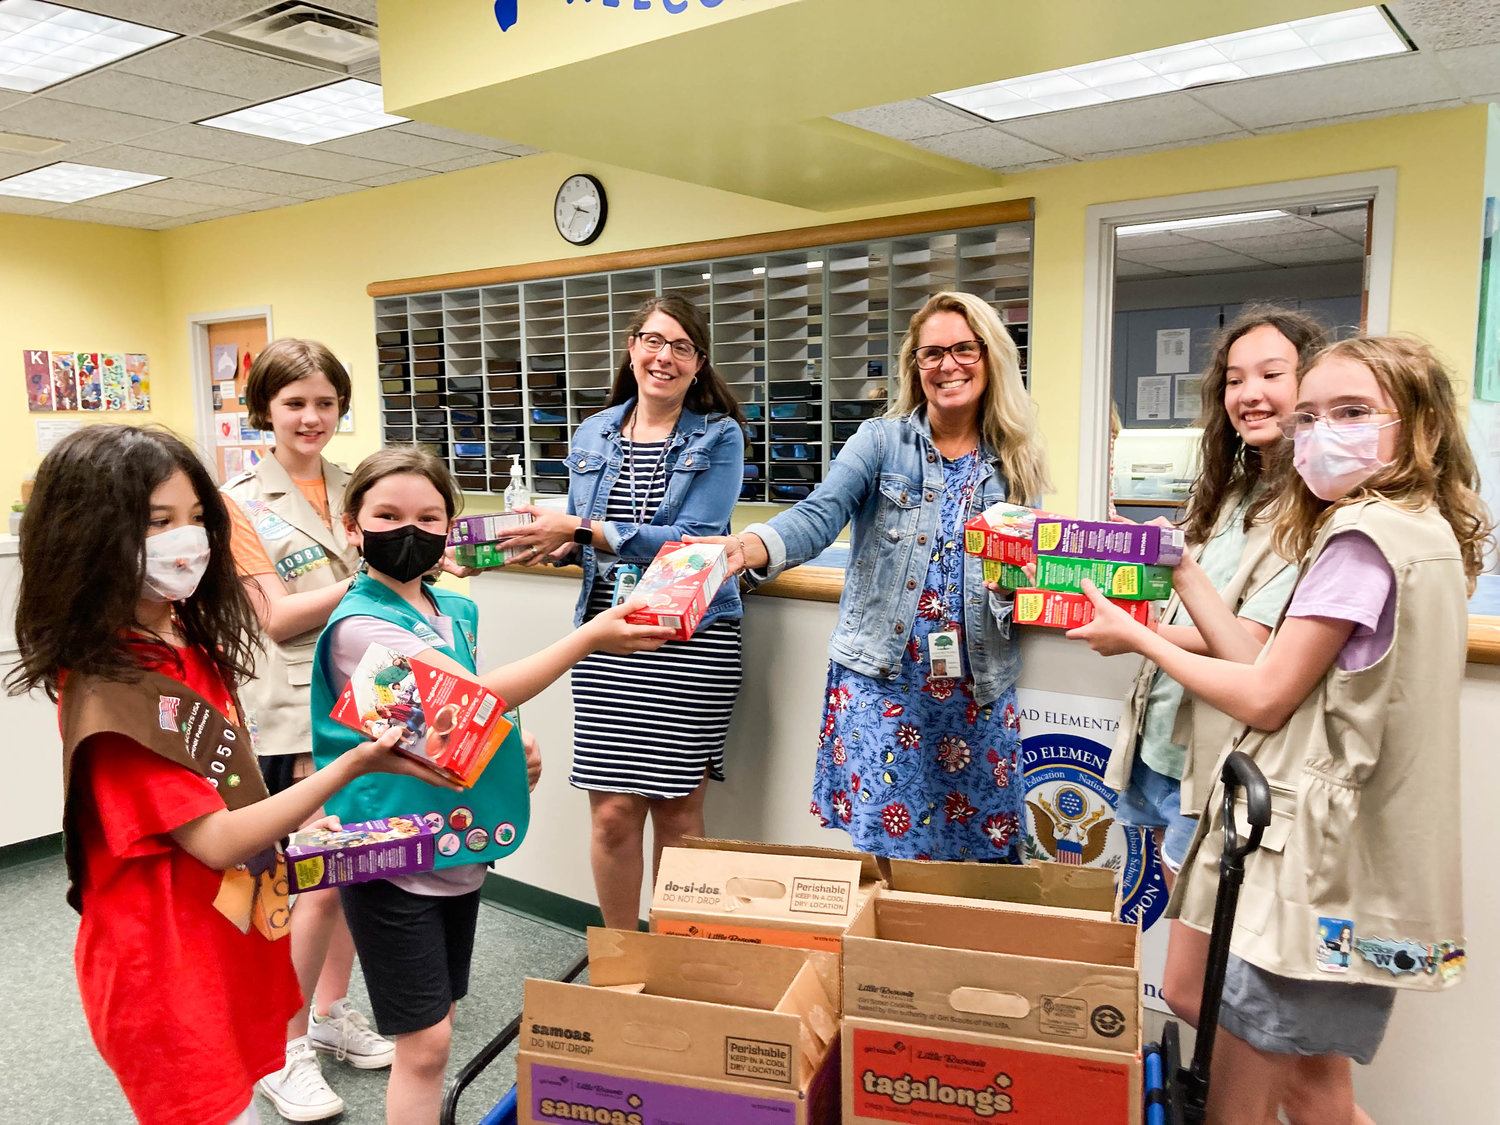 GSNYPENN Girl Scouts from Fayetteville-Manlius schools (Onondaga County) recently presented cookies donated through the 2022 Sweet Support Gift of Caring service project to faculty and staff at Enders Road Elementary in Manlius.